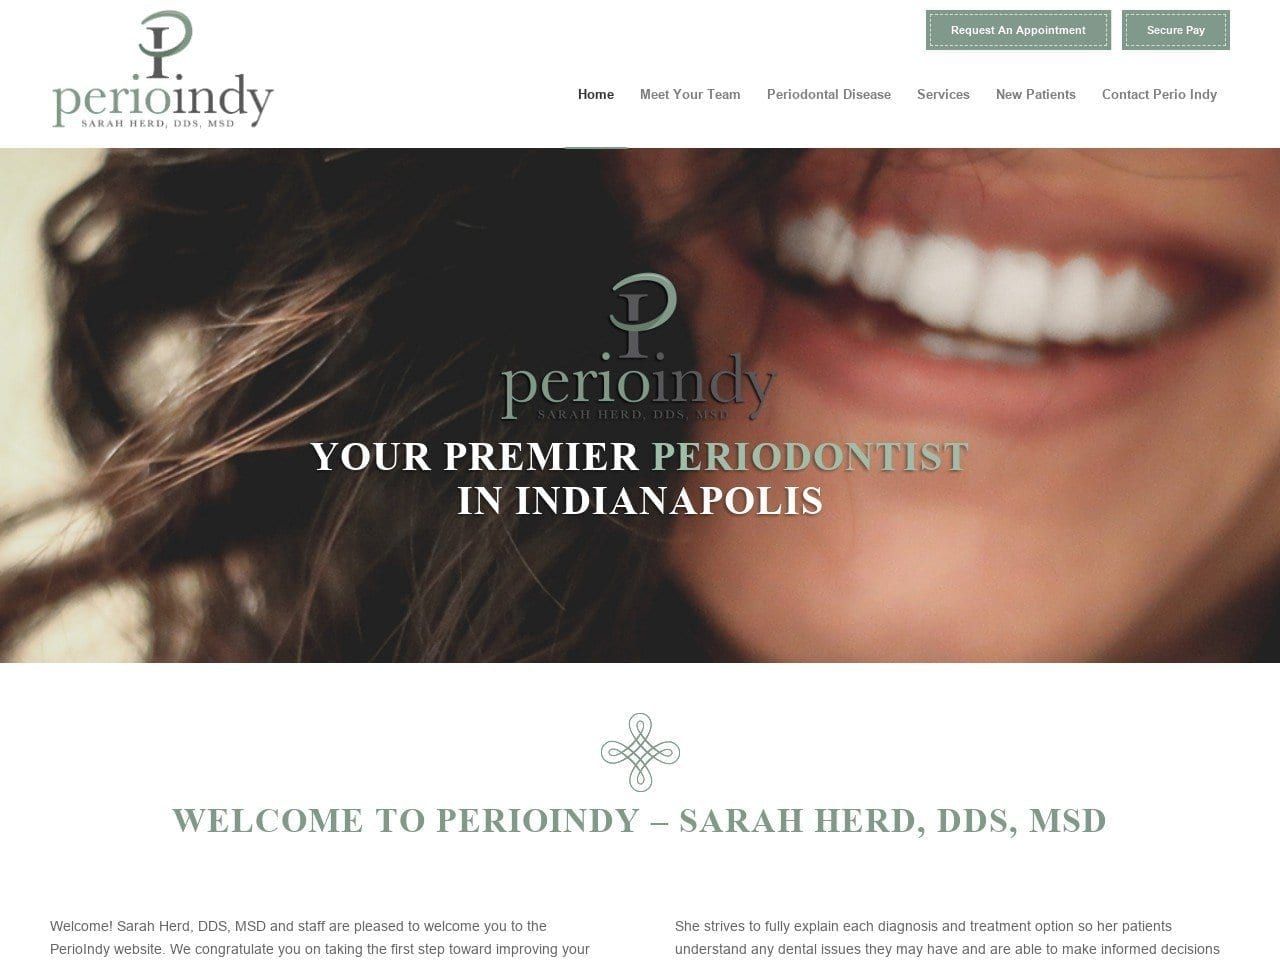 Perio Indy Website Screenshot from perio-indy.com